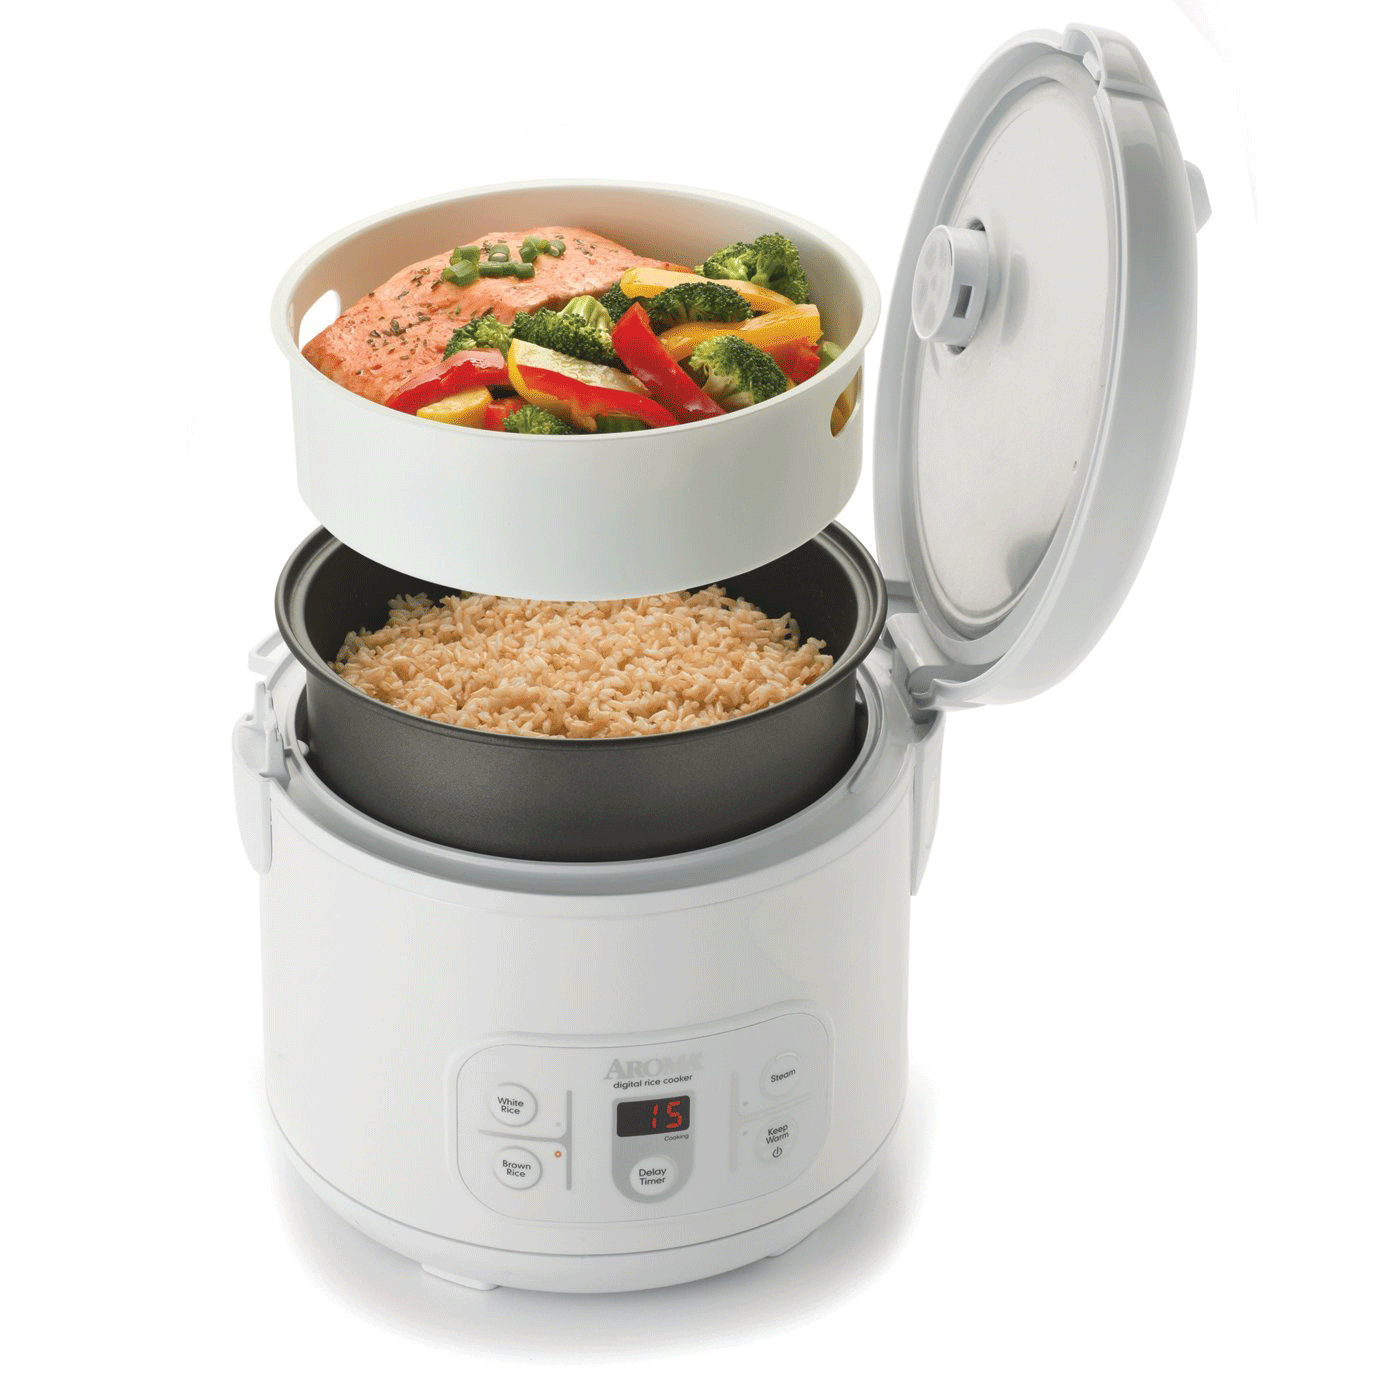 Aroma ARC-996 rice cooker | Best Aroma Rice Cookers Aroma Rice Cooker Arc 996 Manual